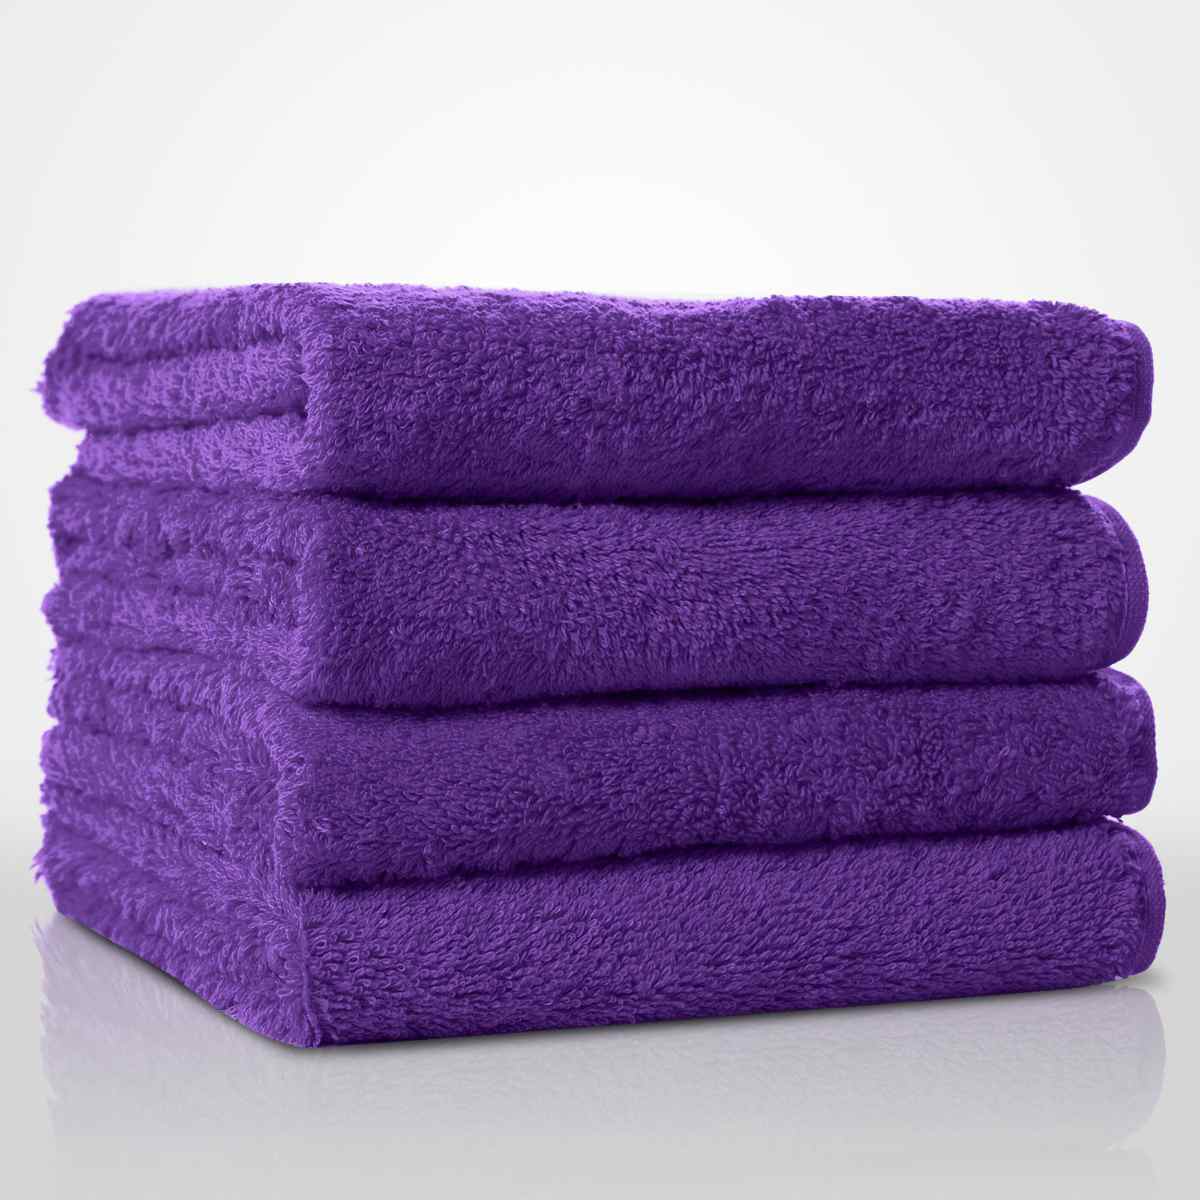 16x29 turkish cotton purple hand towel | How To Choose The Right Wholesale Towels For Your Business | wholesale towels | wholesale beach towels 